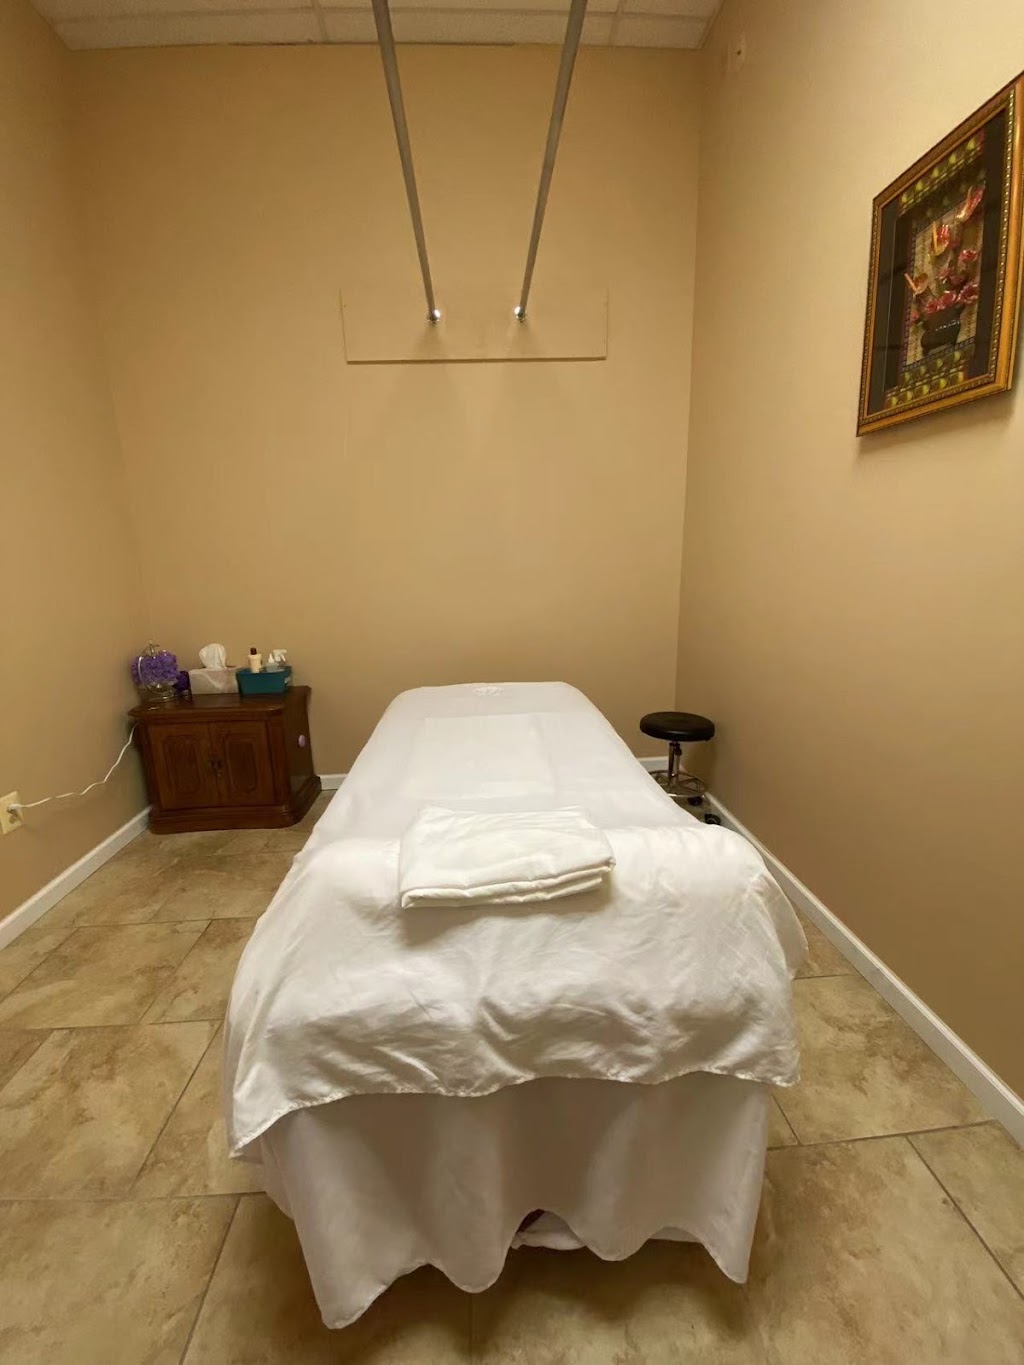 Healing Hands Massage Therapy | 20 Jackson St Unit D, Freehold, NJ 07728 | Phone: (848) 260-7788